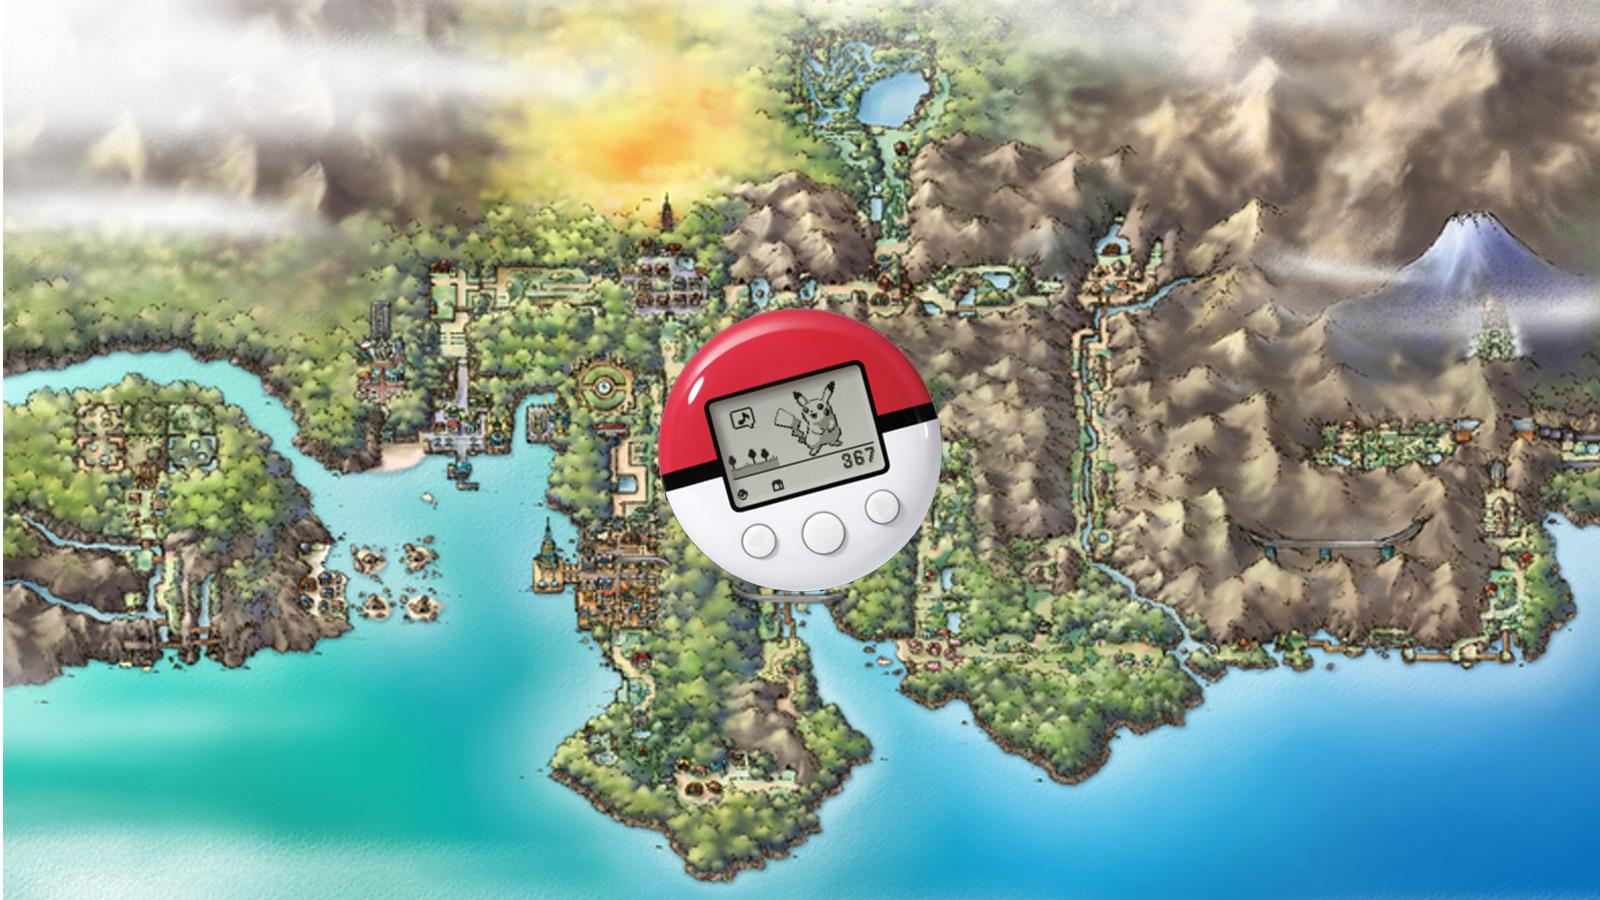 The Pokewalker device on top of a map of the Johto region